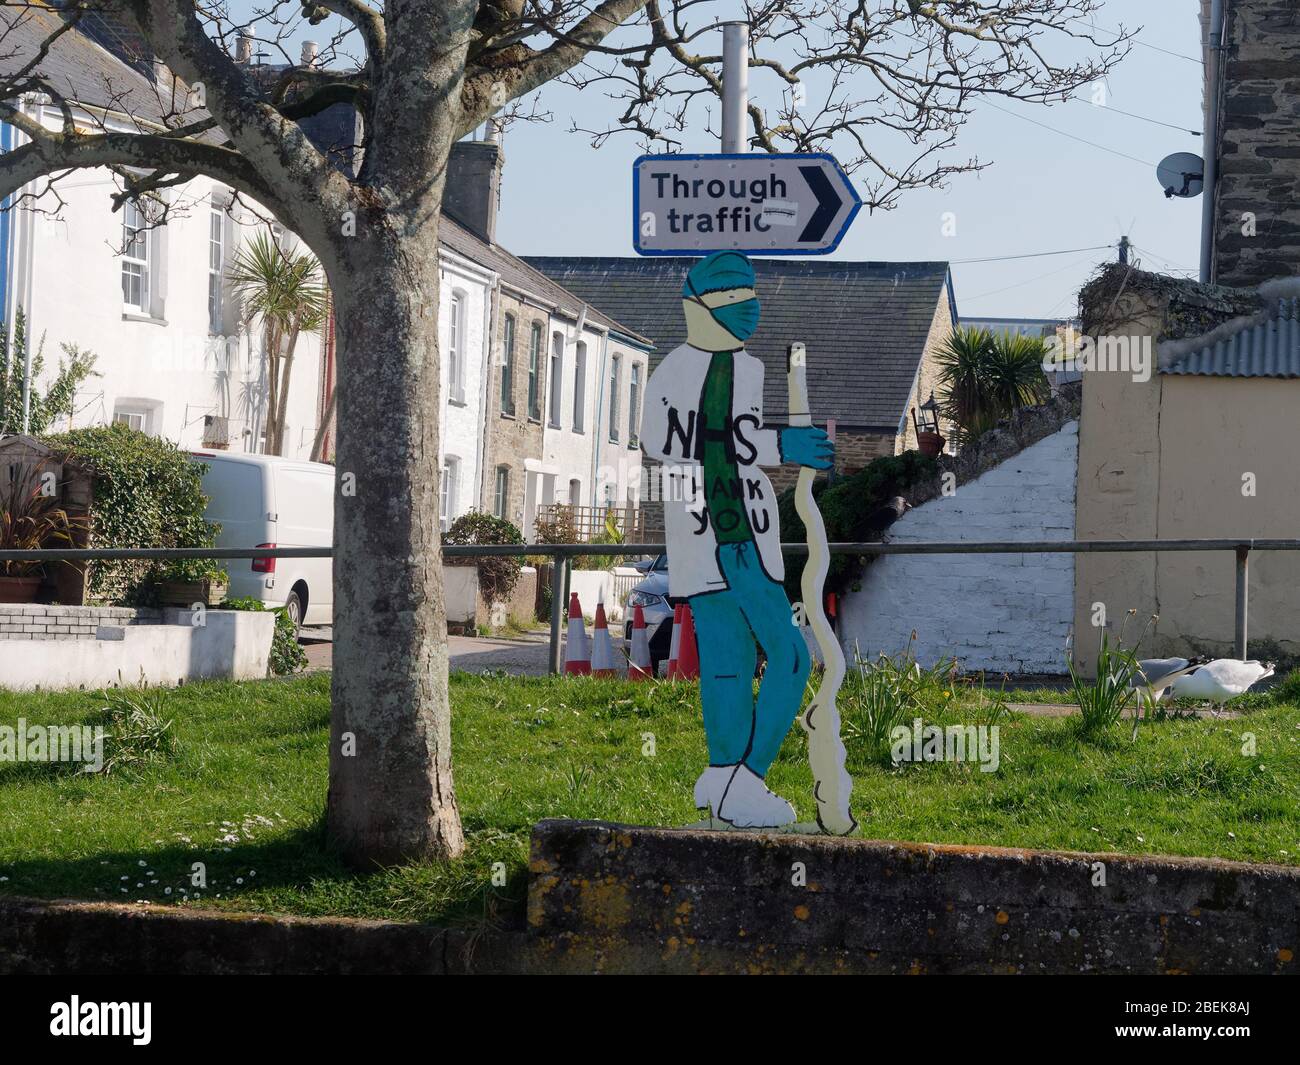 A town deserted during Covid pandemic Newquay Cornwall UK Stock Photo